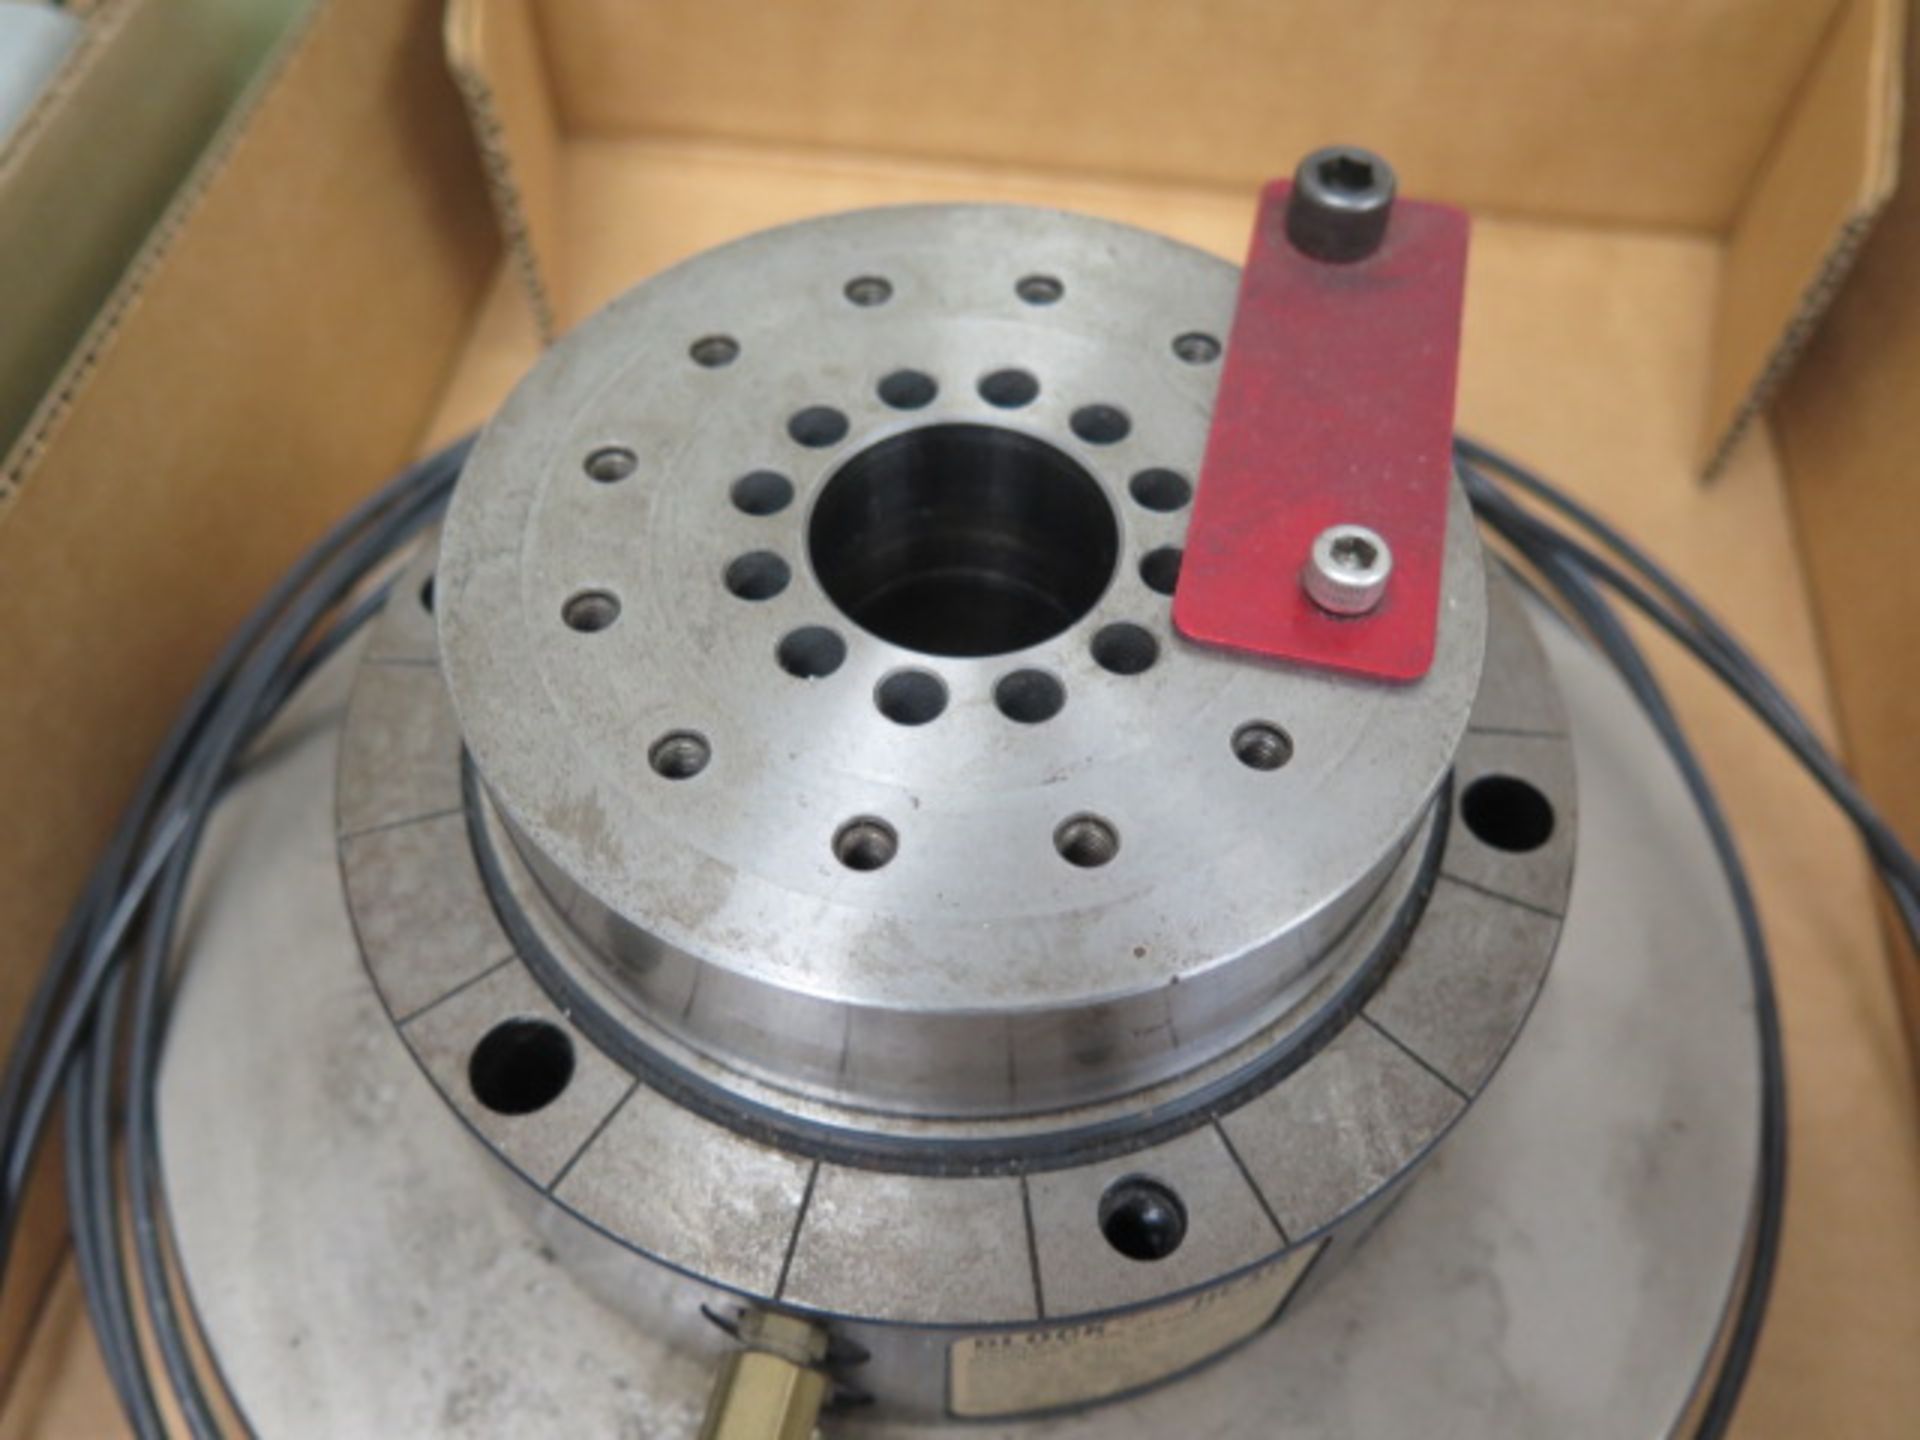 Professional Instruments "Block-Head" Universal Air Bearing Spindle - Image 2 of 3